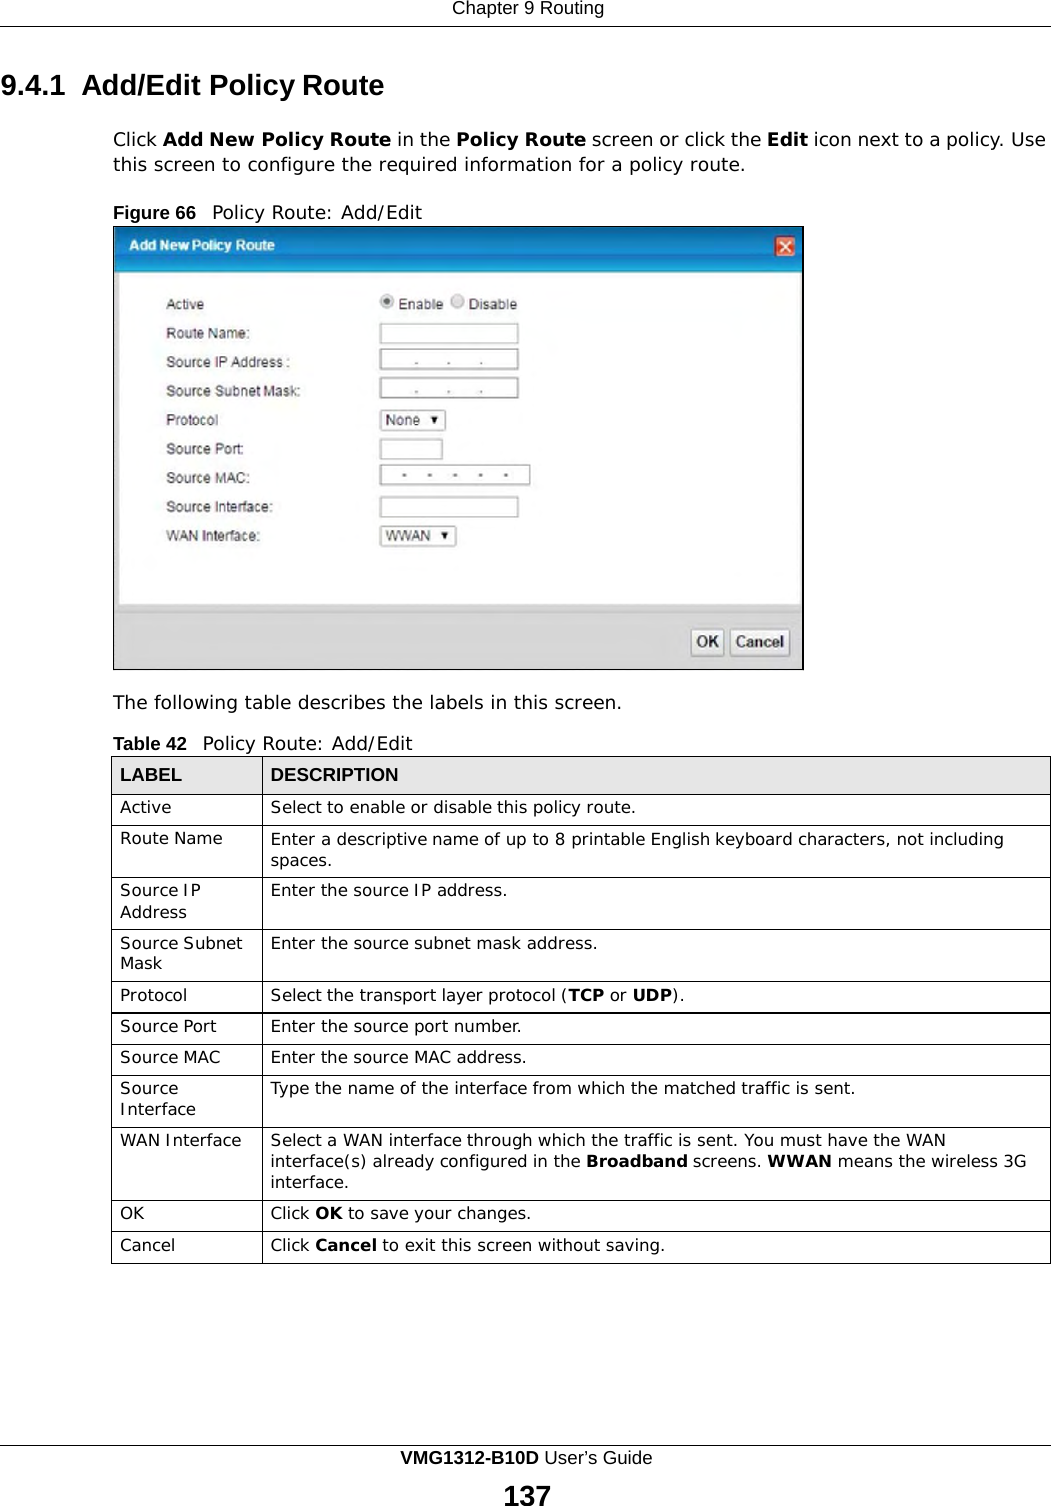 Chapter 9 Routing      9.4.1 Add/Edit Policy Route  Click Add New Policy Route in the Policy Route screen or click the Edit icon next to a policy. Use this screen to configure the required information for a policy route.  Figure 66   Policy Route: Add/Edit                       The following table describes the labels in this screen.  Table 42   Policy Route: Add/Edit  LABEL DESCRIPTION Active Select to enable or disable this policy route. Route Name Enter a descriptive name of up to 8 printable English keyboard characters, not including spaces. Source IP Address Enter the source IP address. Source Subnet Mask Enter the source subnet mask address. Protocol Select the transport layer protocol (TCP or UDP). Source Port Enter the source port number. Source MAC Enter the source MAC address. Source Interface Type the name of the interface from which the matched traffic is sent. WAN Interface Select a WAN interface through which the traffic is sent. You must have the WAN interface(s) already configured in the Broadband screens. WWAN means the wireless 3G interface. OK Click OK to save your changes. Cancel Click Cancel to exit this screen without saving. VMG1312-B10D User’s Guide 137  